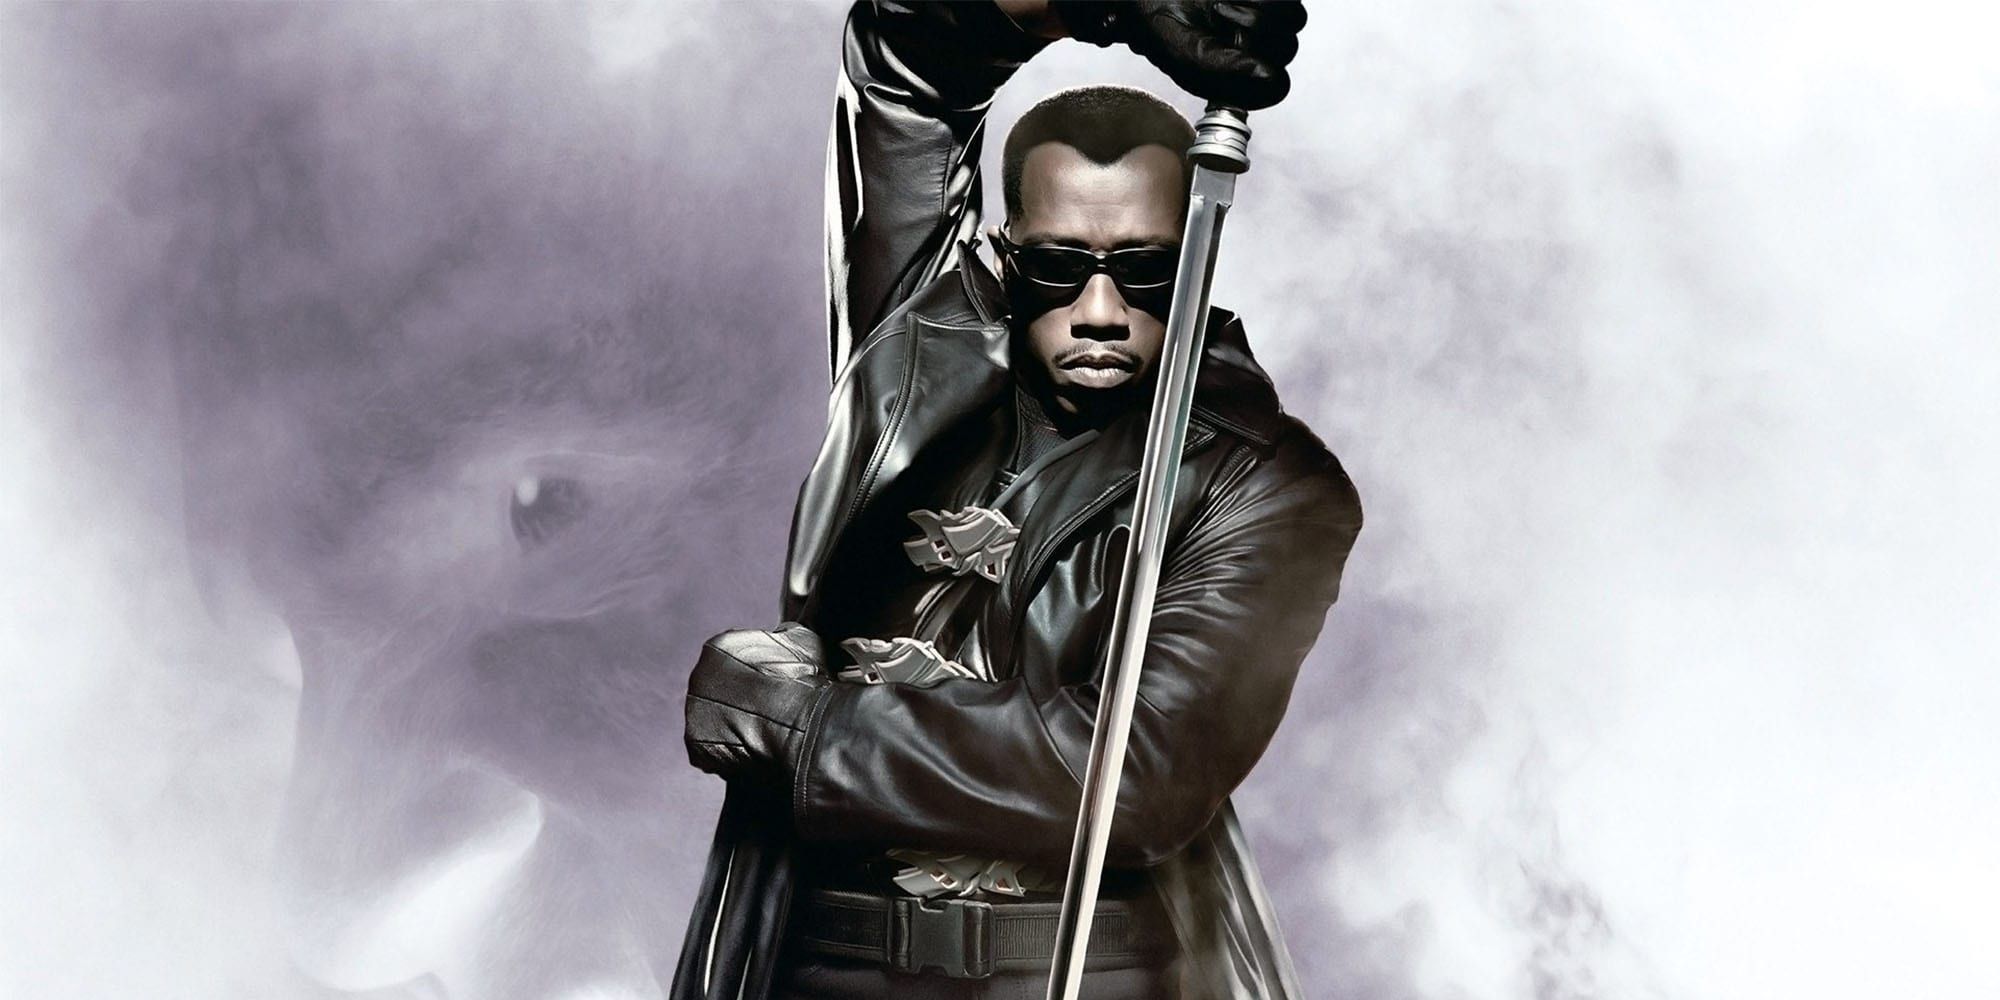 Blade in a promo image